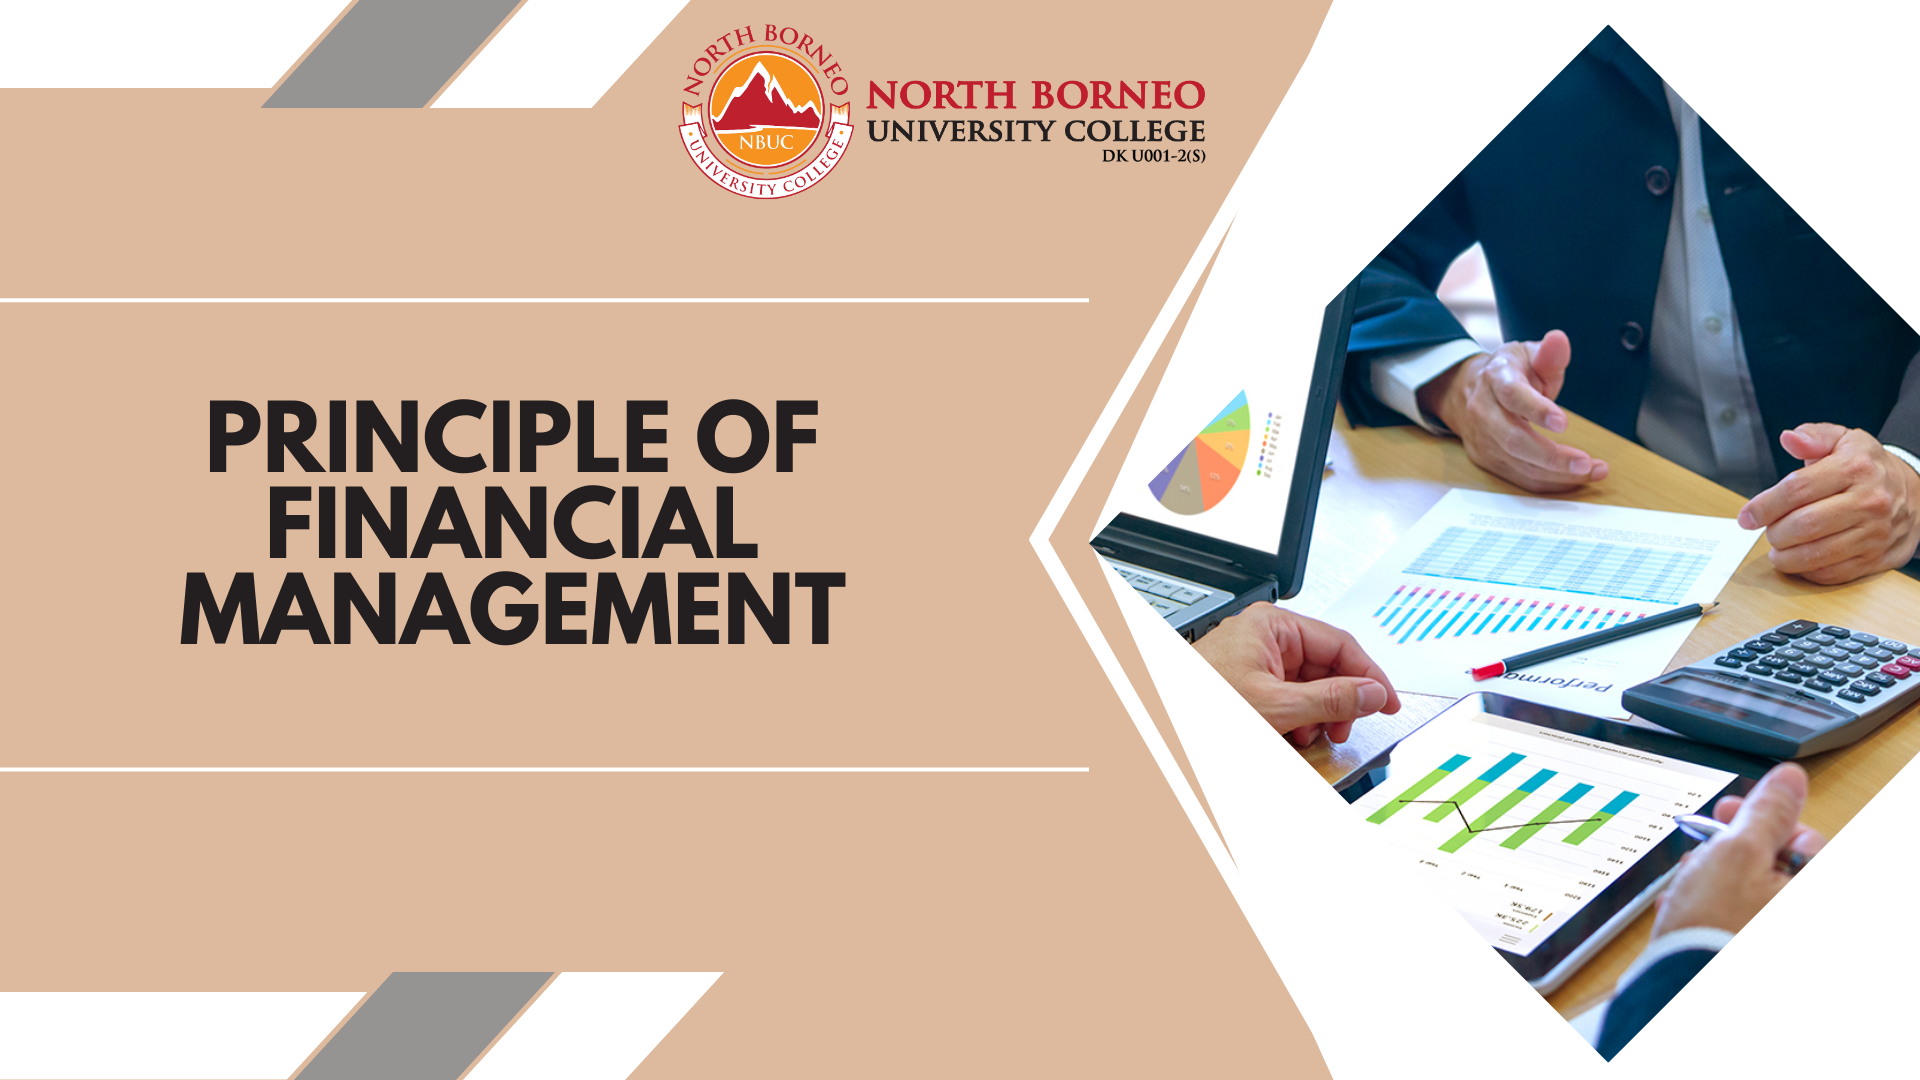 Principle of Financial Management (BBA IB ODL)